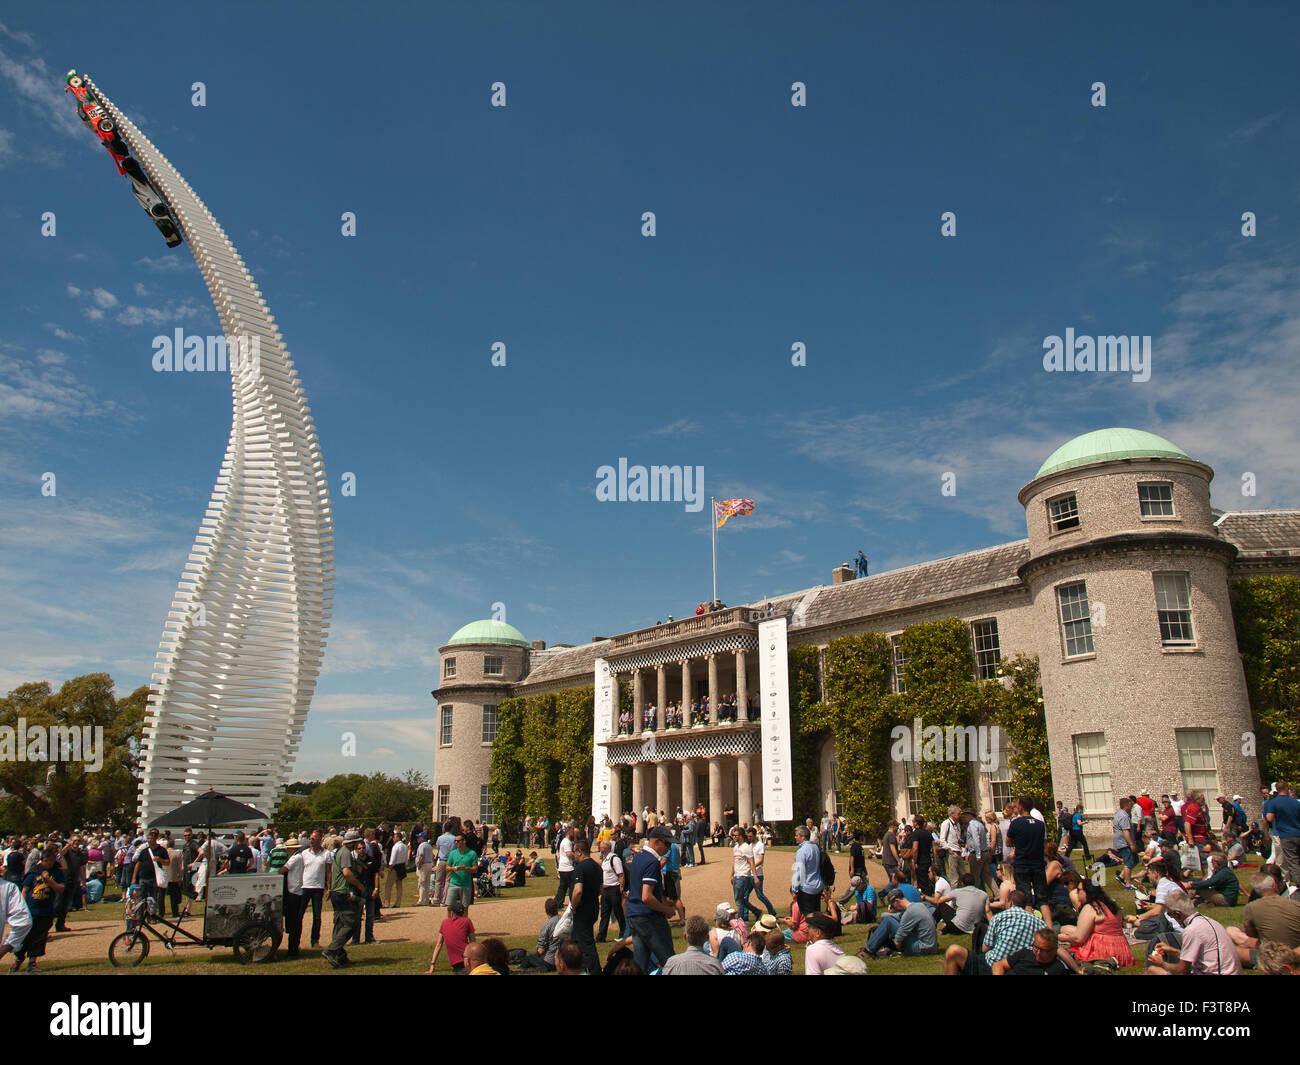 Goodwood Festival of Speed 2015 Mazda 40 metre high sculpture in front of Goodwood House featuring two Mazda race cars Stock Photo